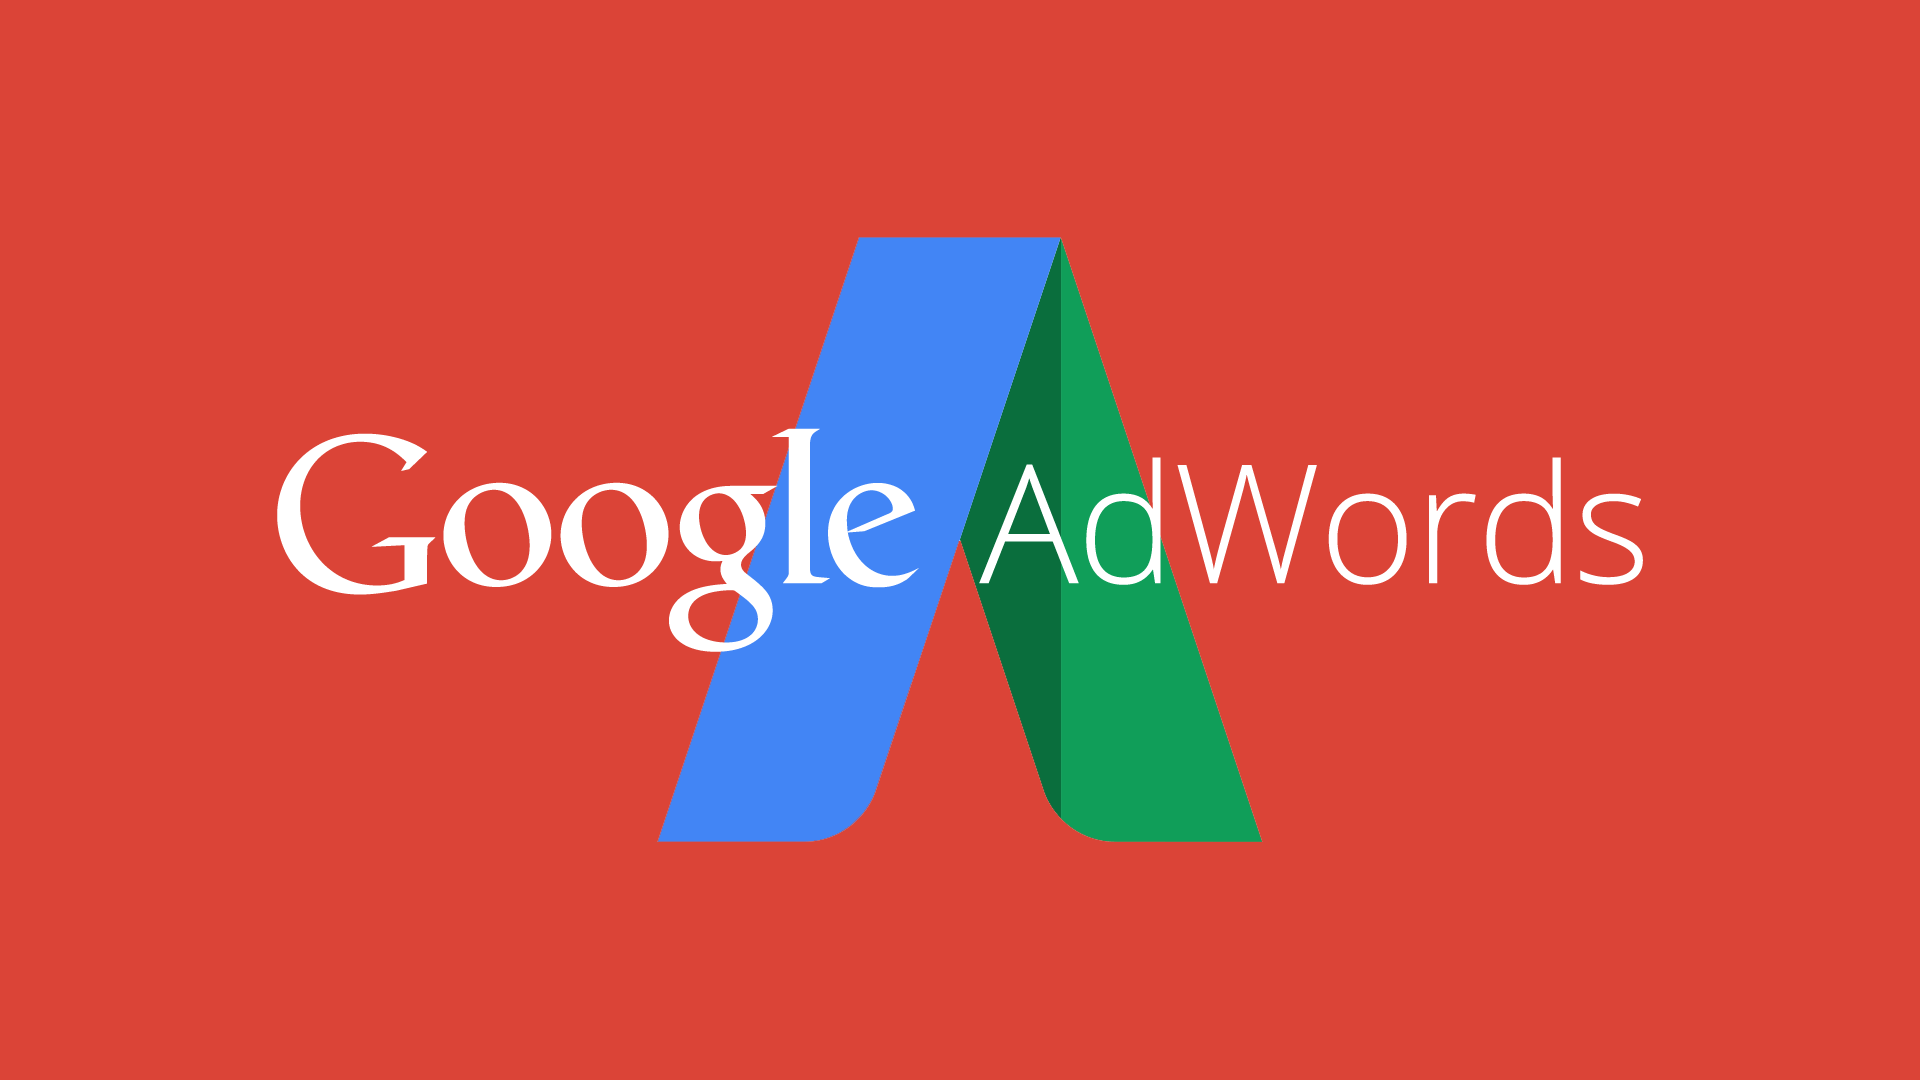 What is Google Adwords?